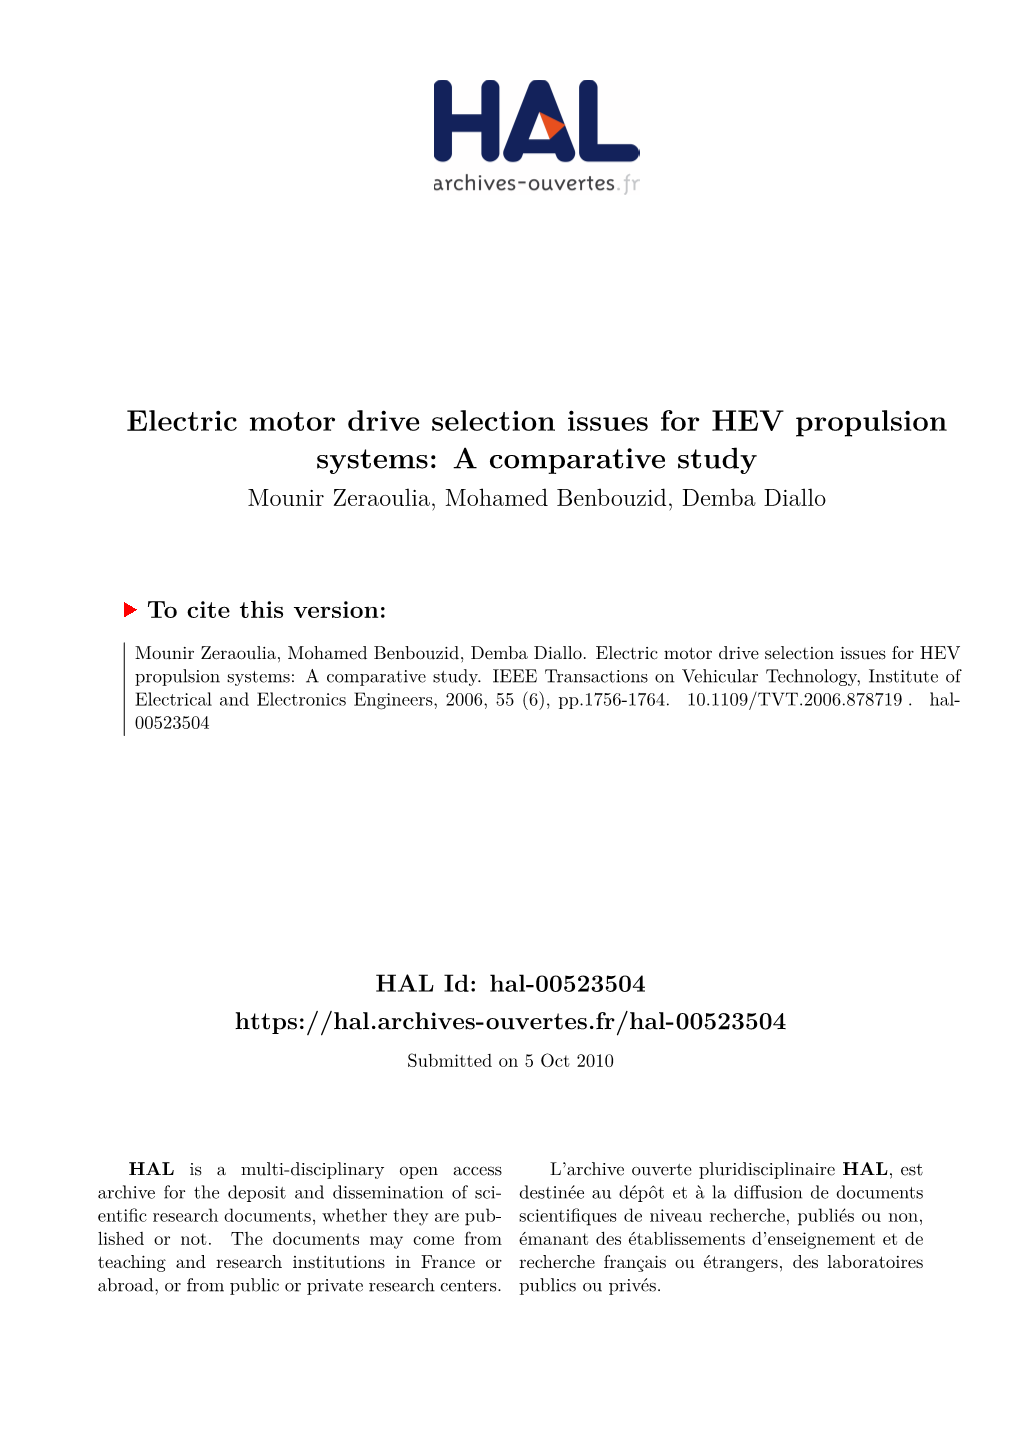 Electric Motor Drive Selection Issues for HEV Propulsion Systems: a Comparative Study Mounir Zeraoulia, Mohamed Benbouzid, Demba Diallo